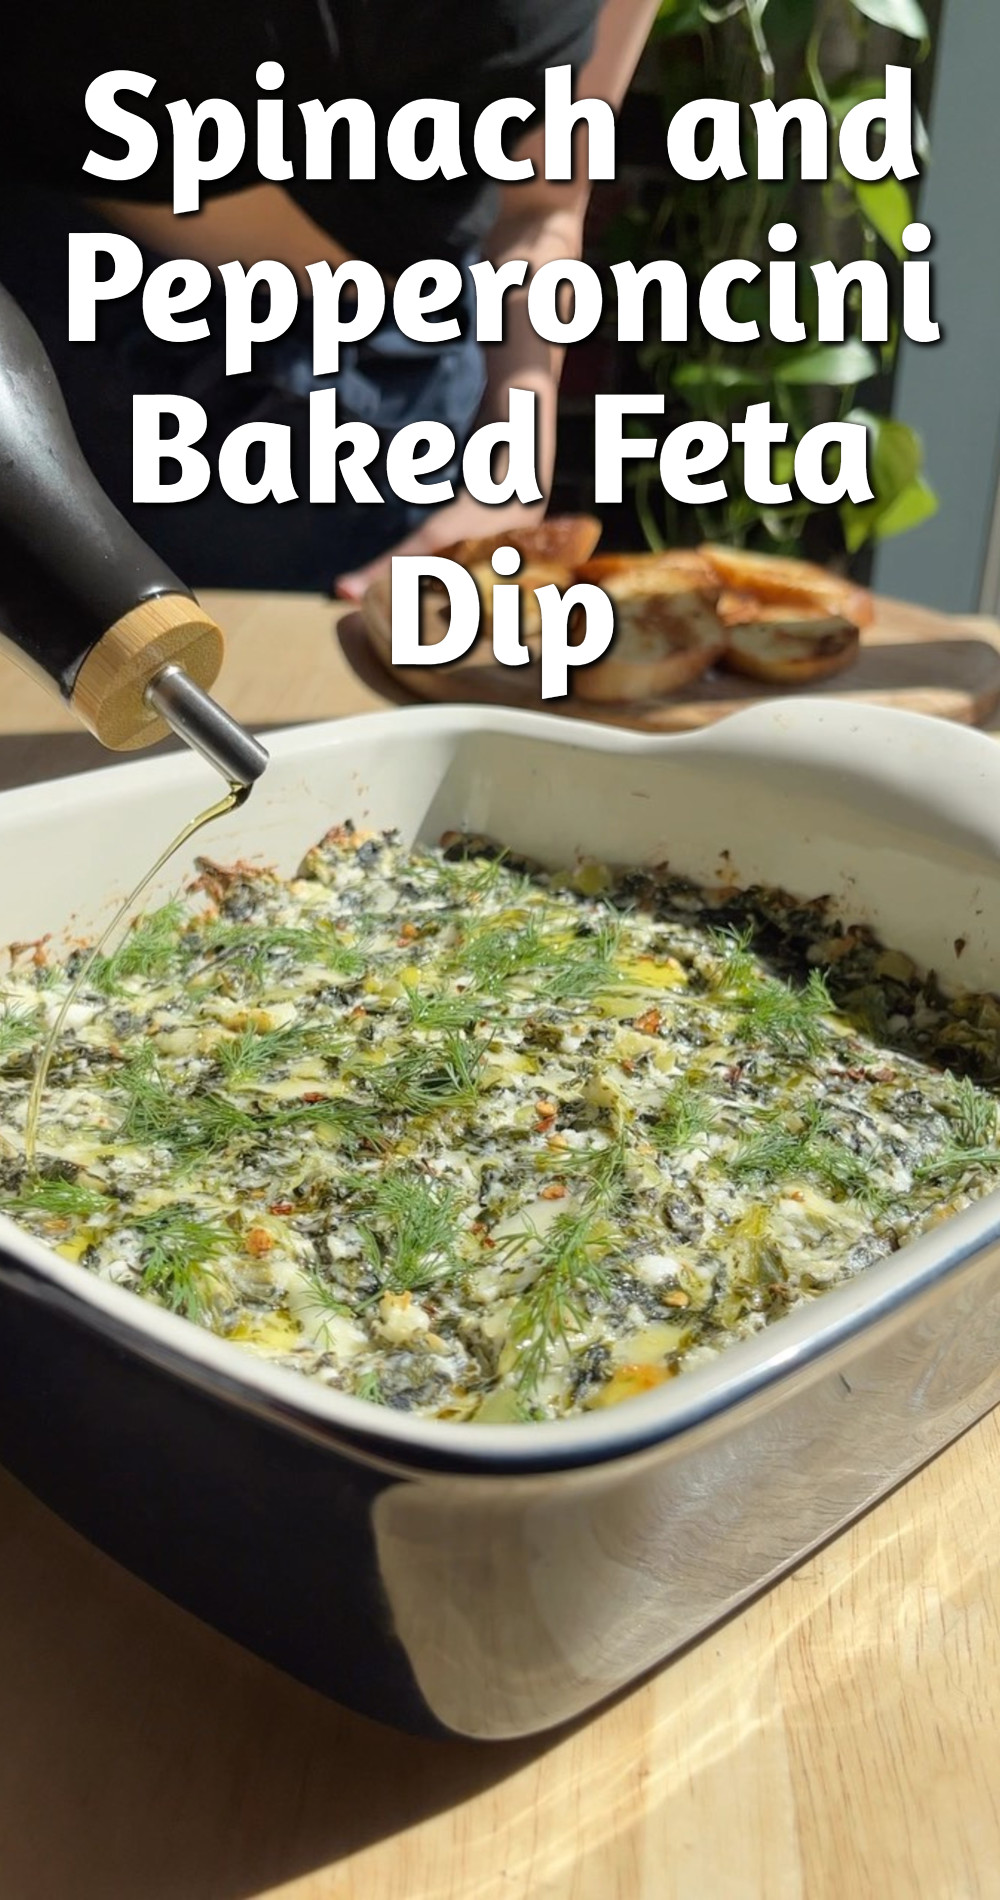 Spinach and Pepperoncini Baked Feta Dip